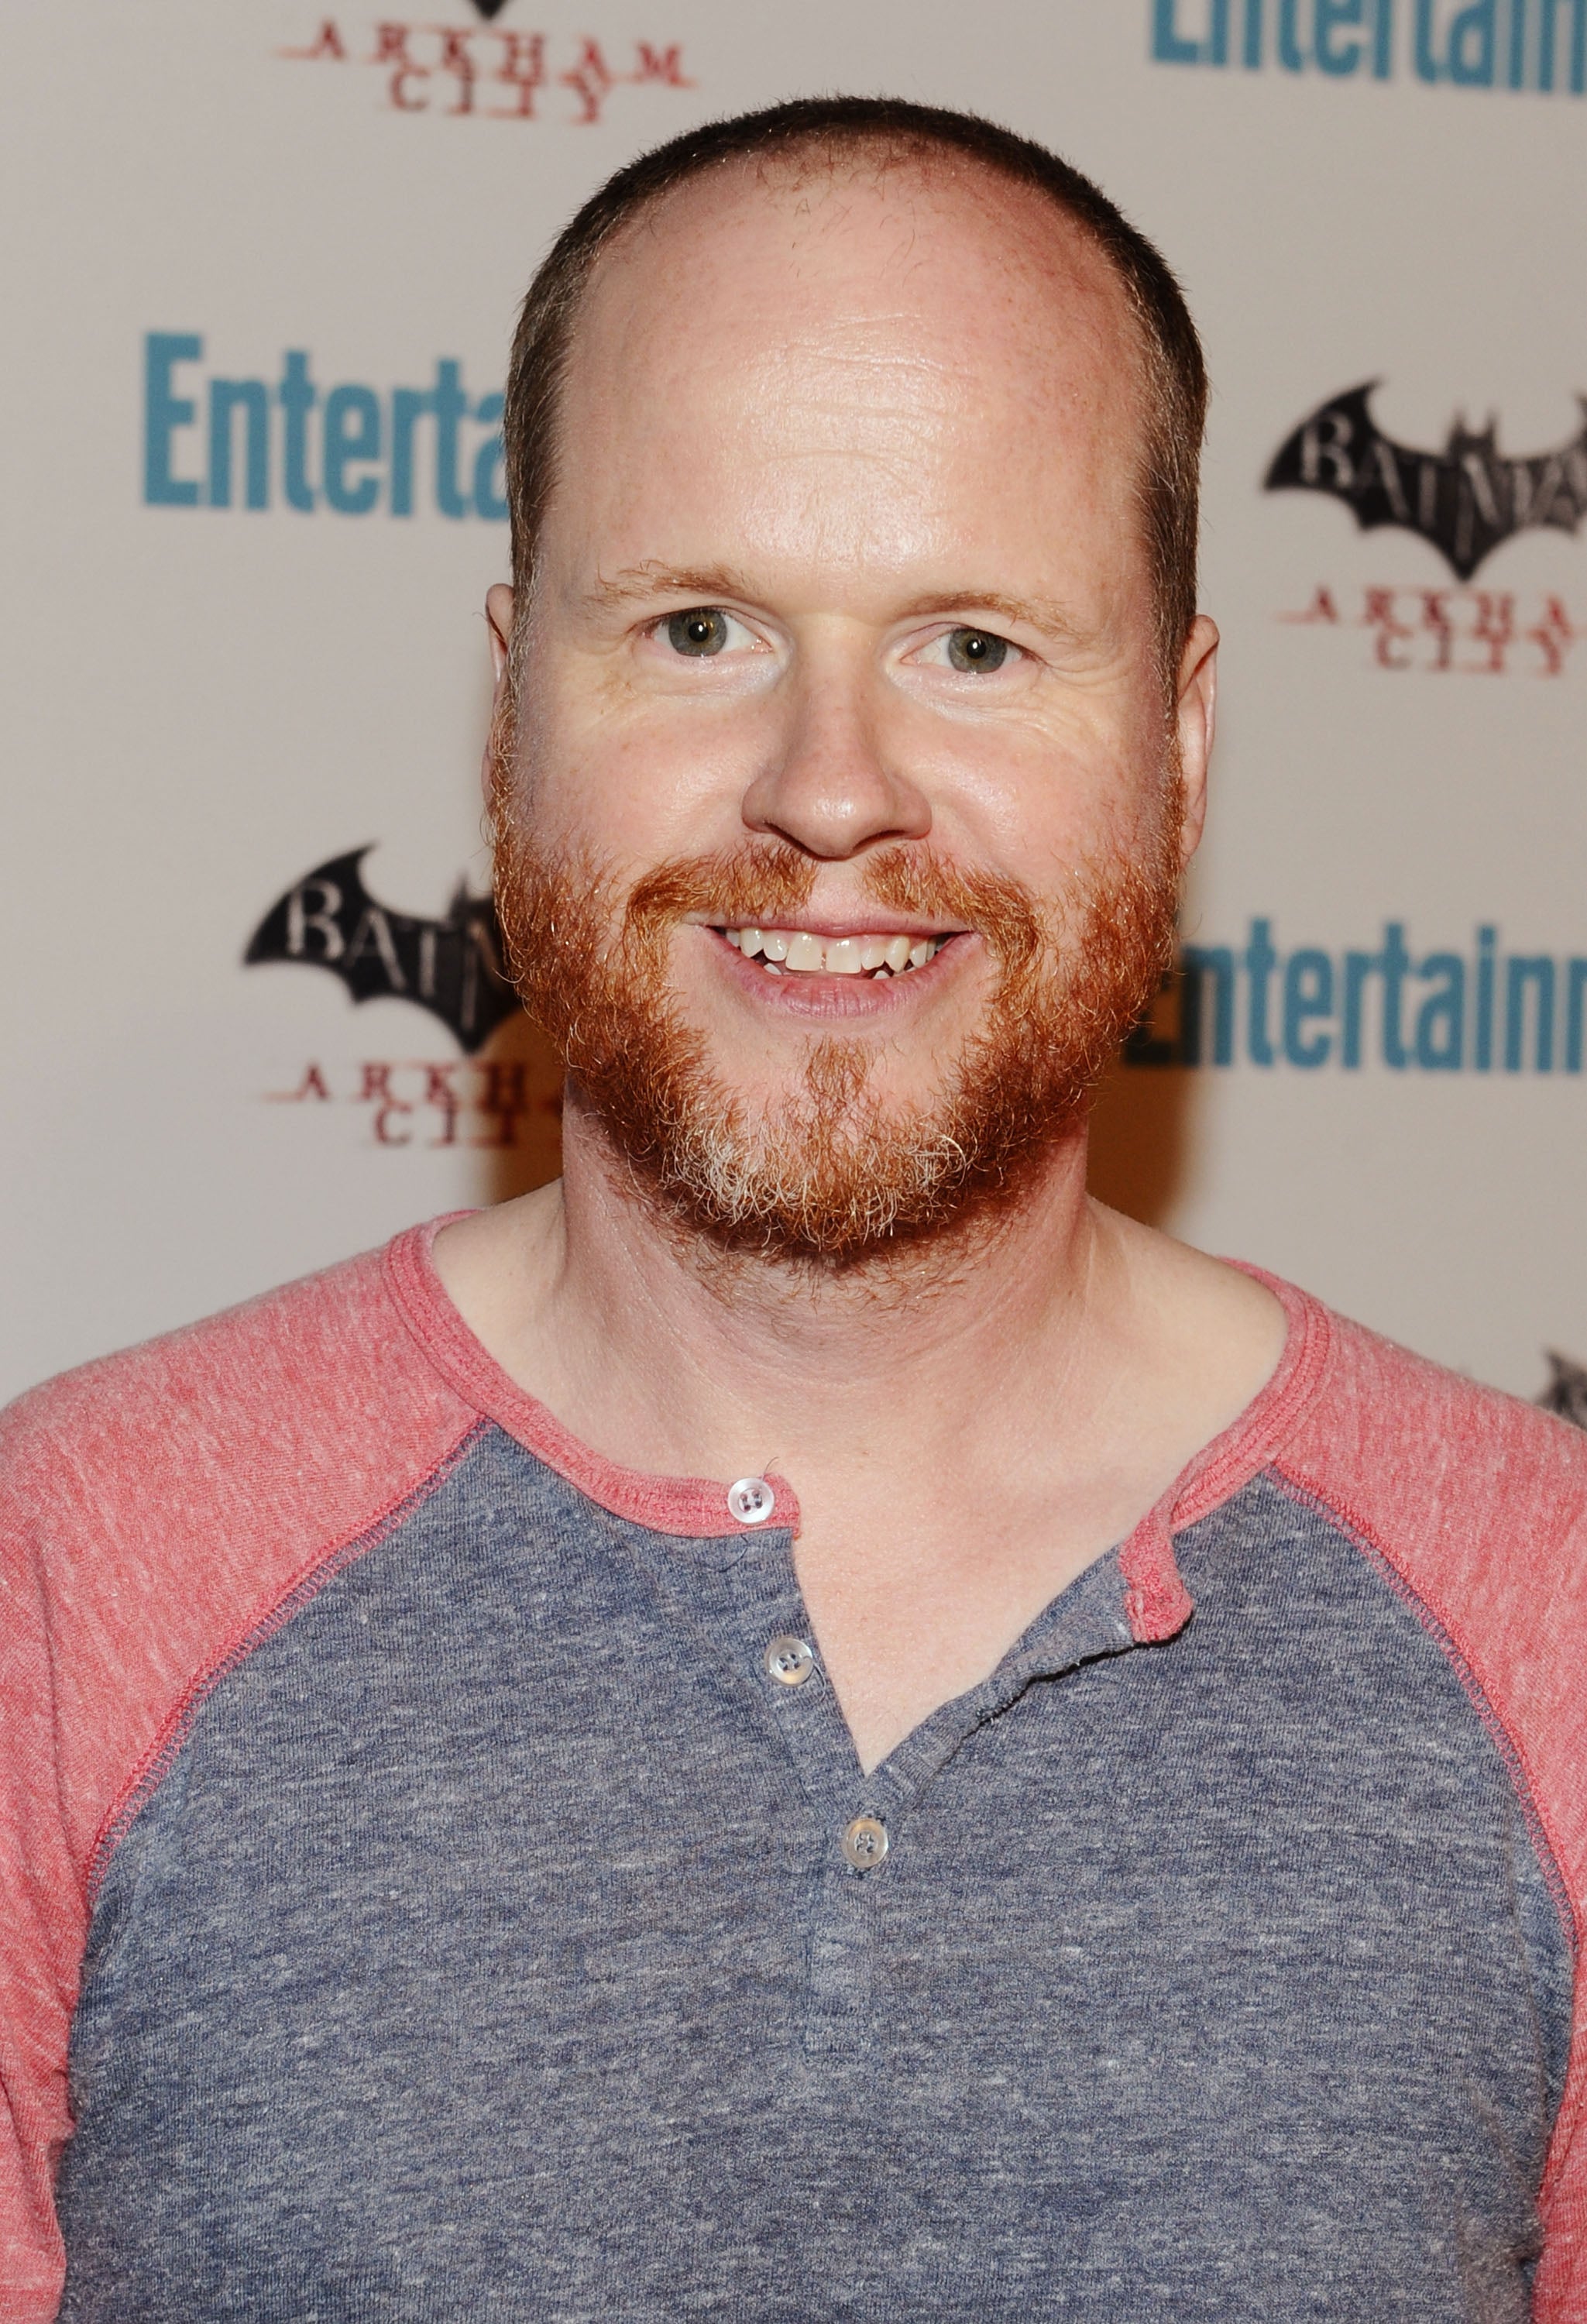 Joss Whedon, the creator of Buffy, has directed the spin-off